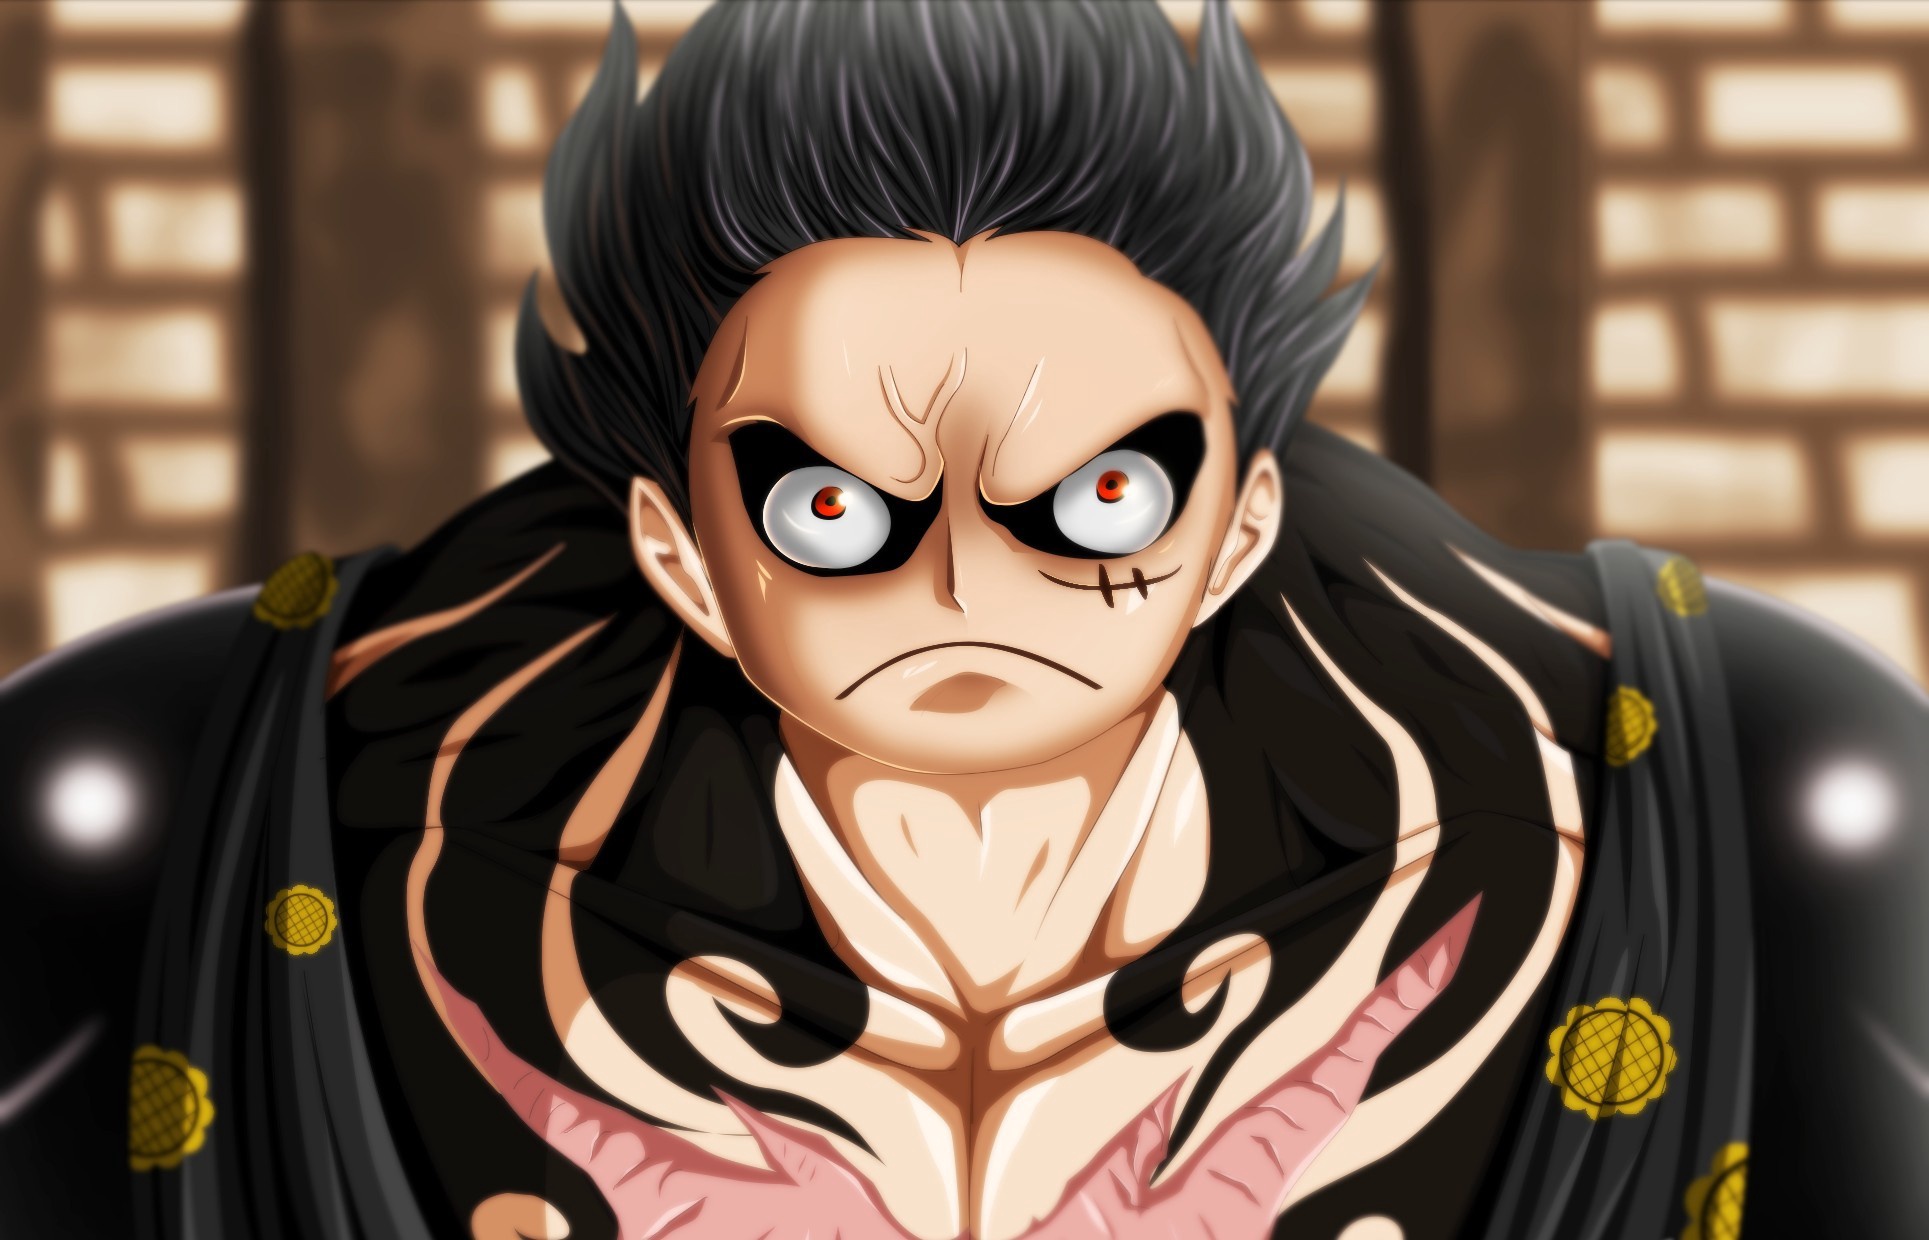 3900+ Anime One Piece HD Wallpapers and Backgrounds